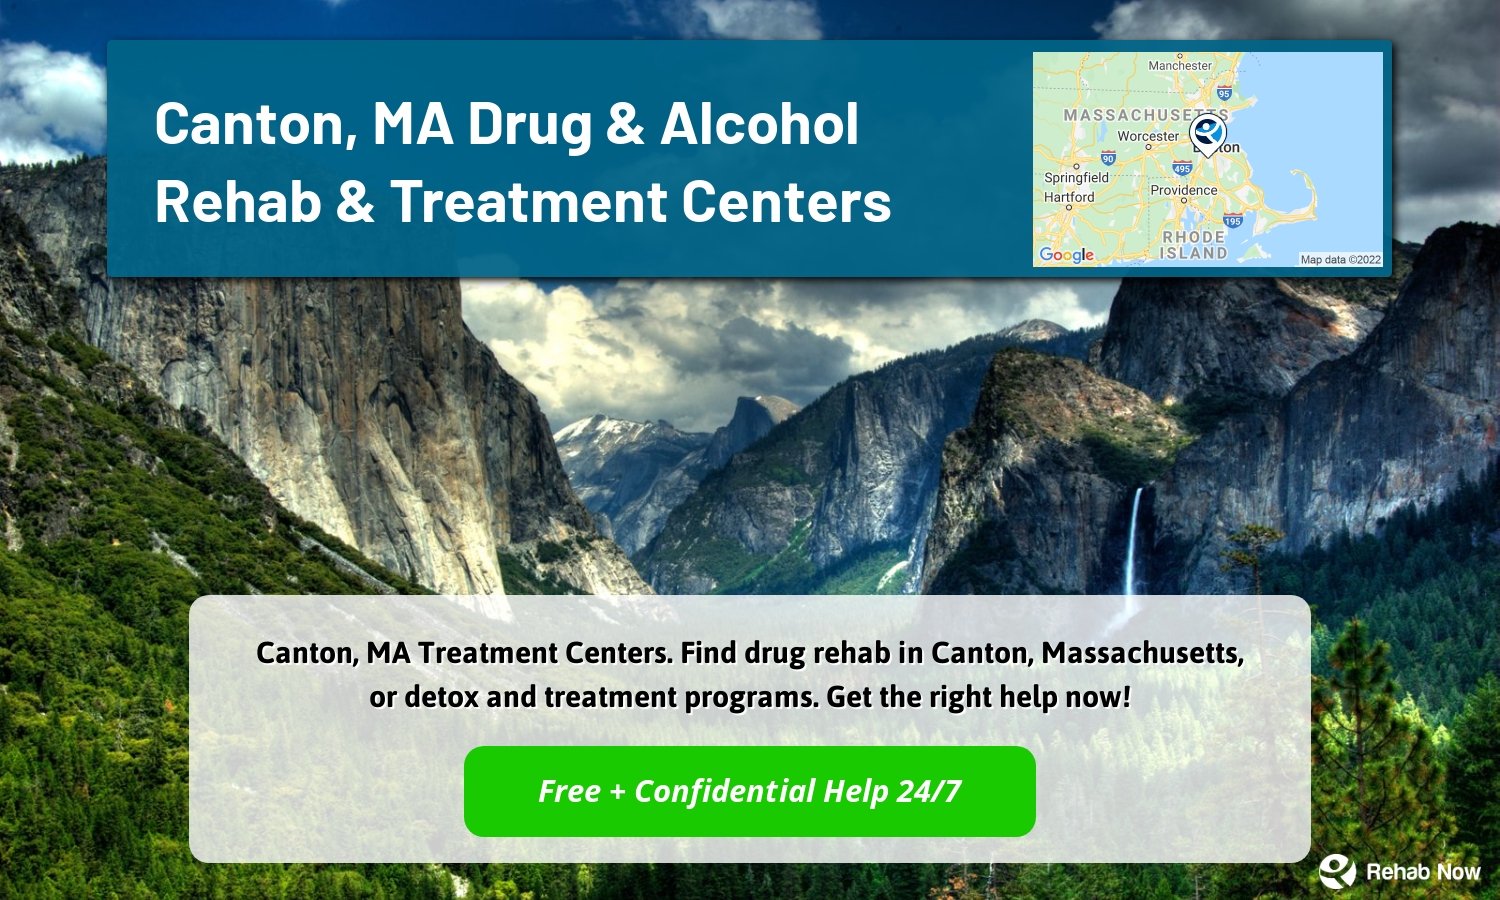 Canton, MA Treatment Centers. Find drug rehab in Canton, Massachusetts, or detox and treatment programs. Get the right help now!